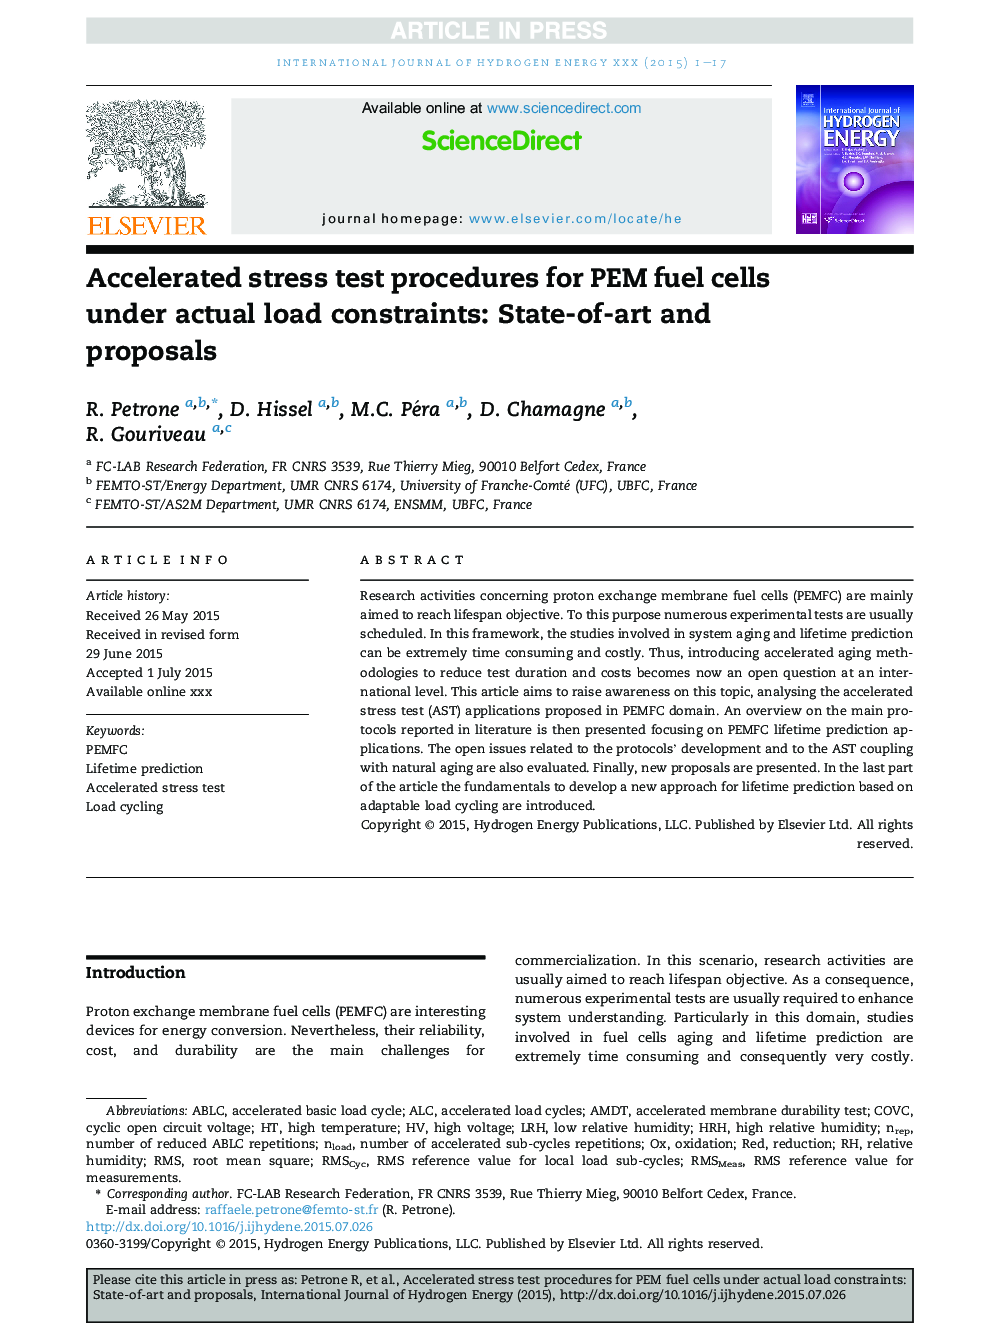 Accelerated stress test procedures for PEM fuel cells under actual load constraints: State-of-art and proposals